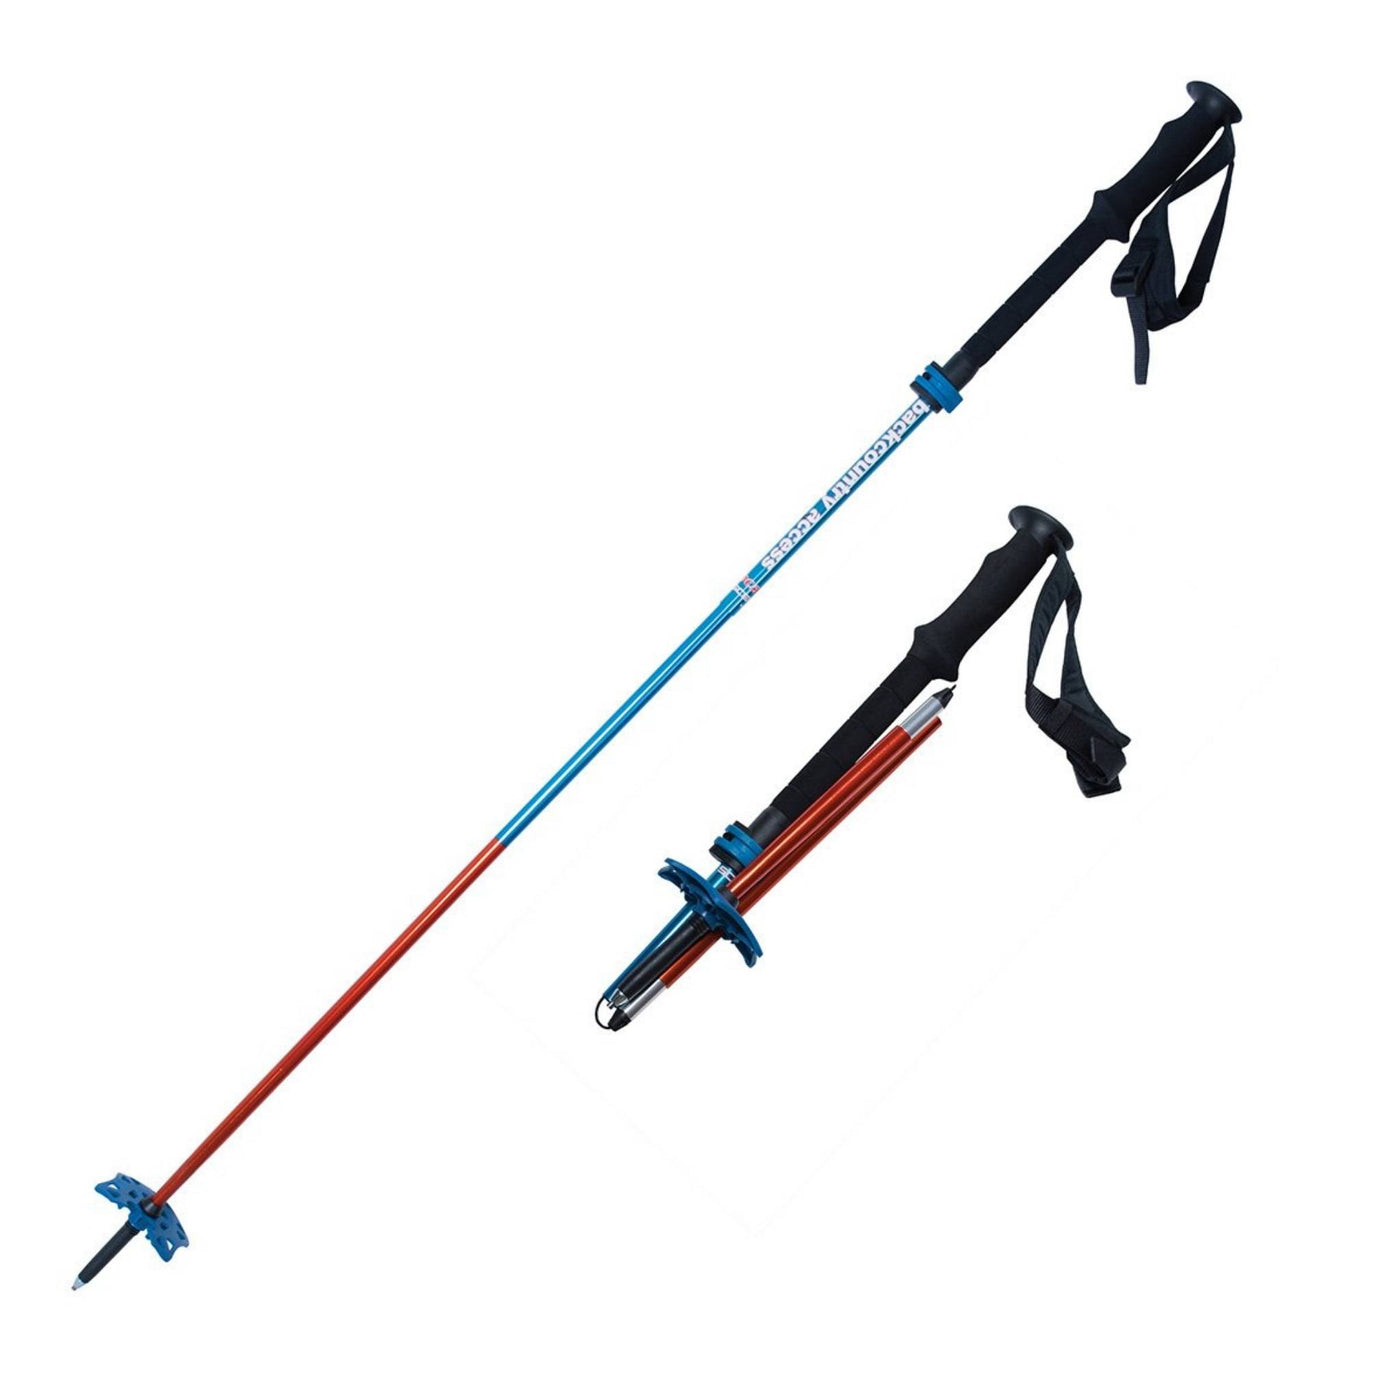 BCA Scepter 4S Pole | Mountaineering and Alpine Gear | Further Faster Christchurch NZ 